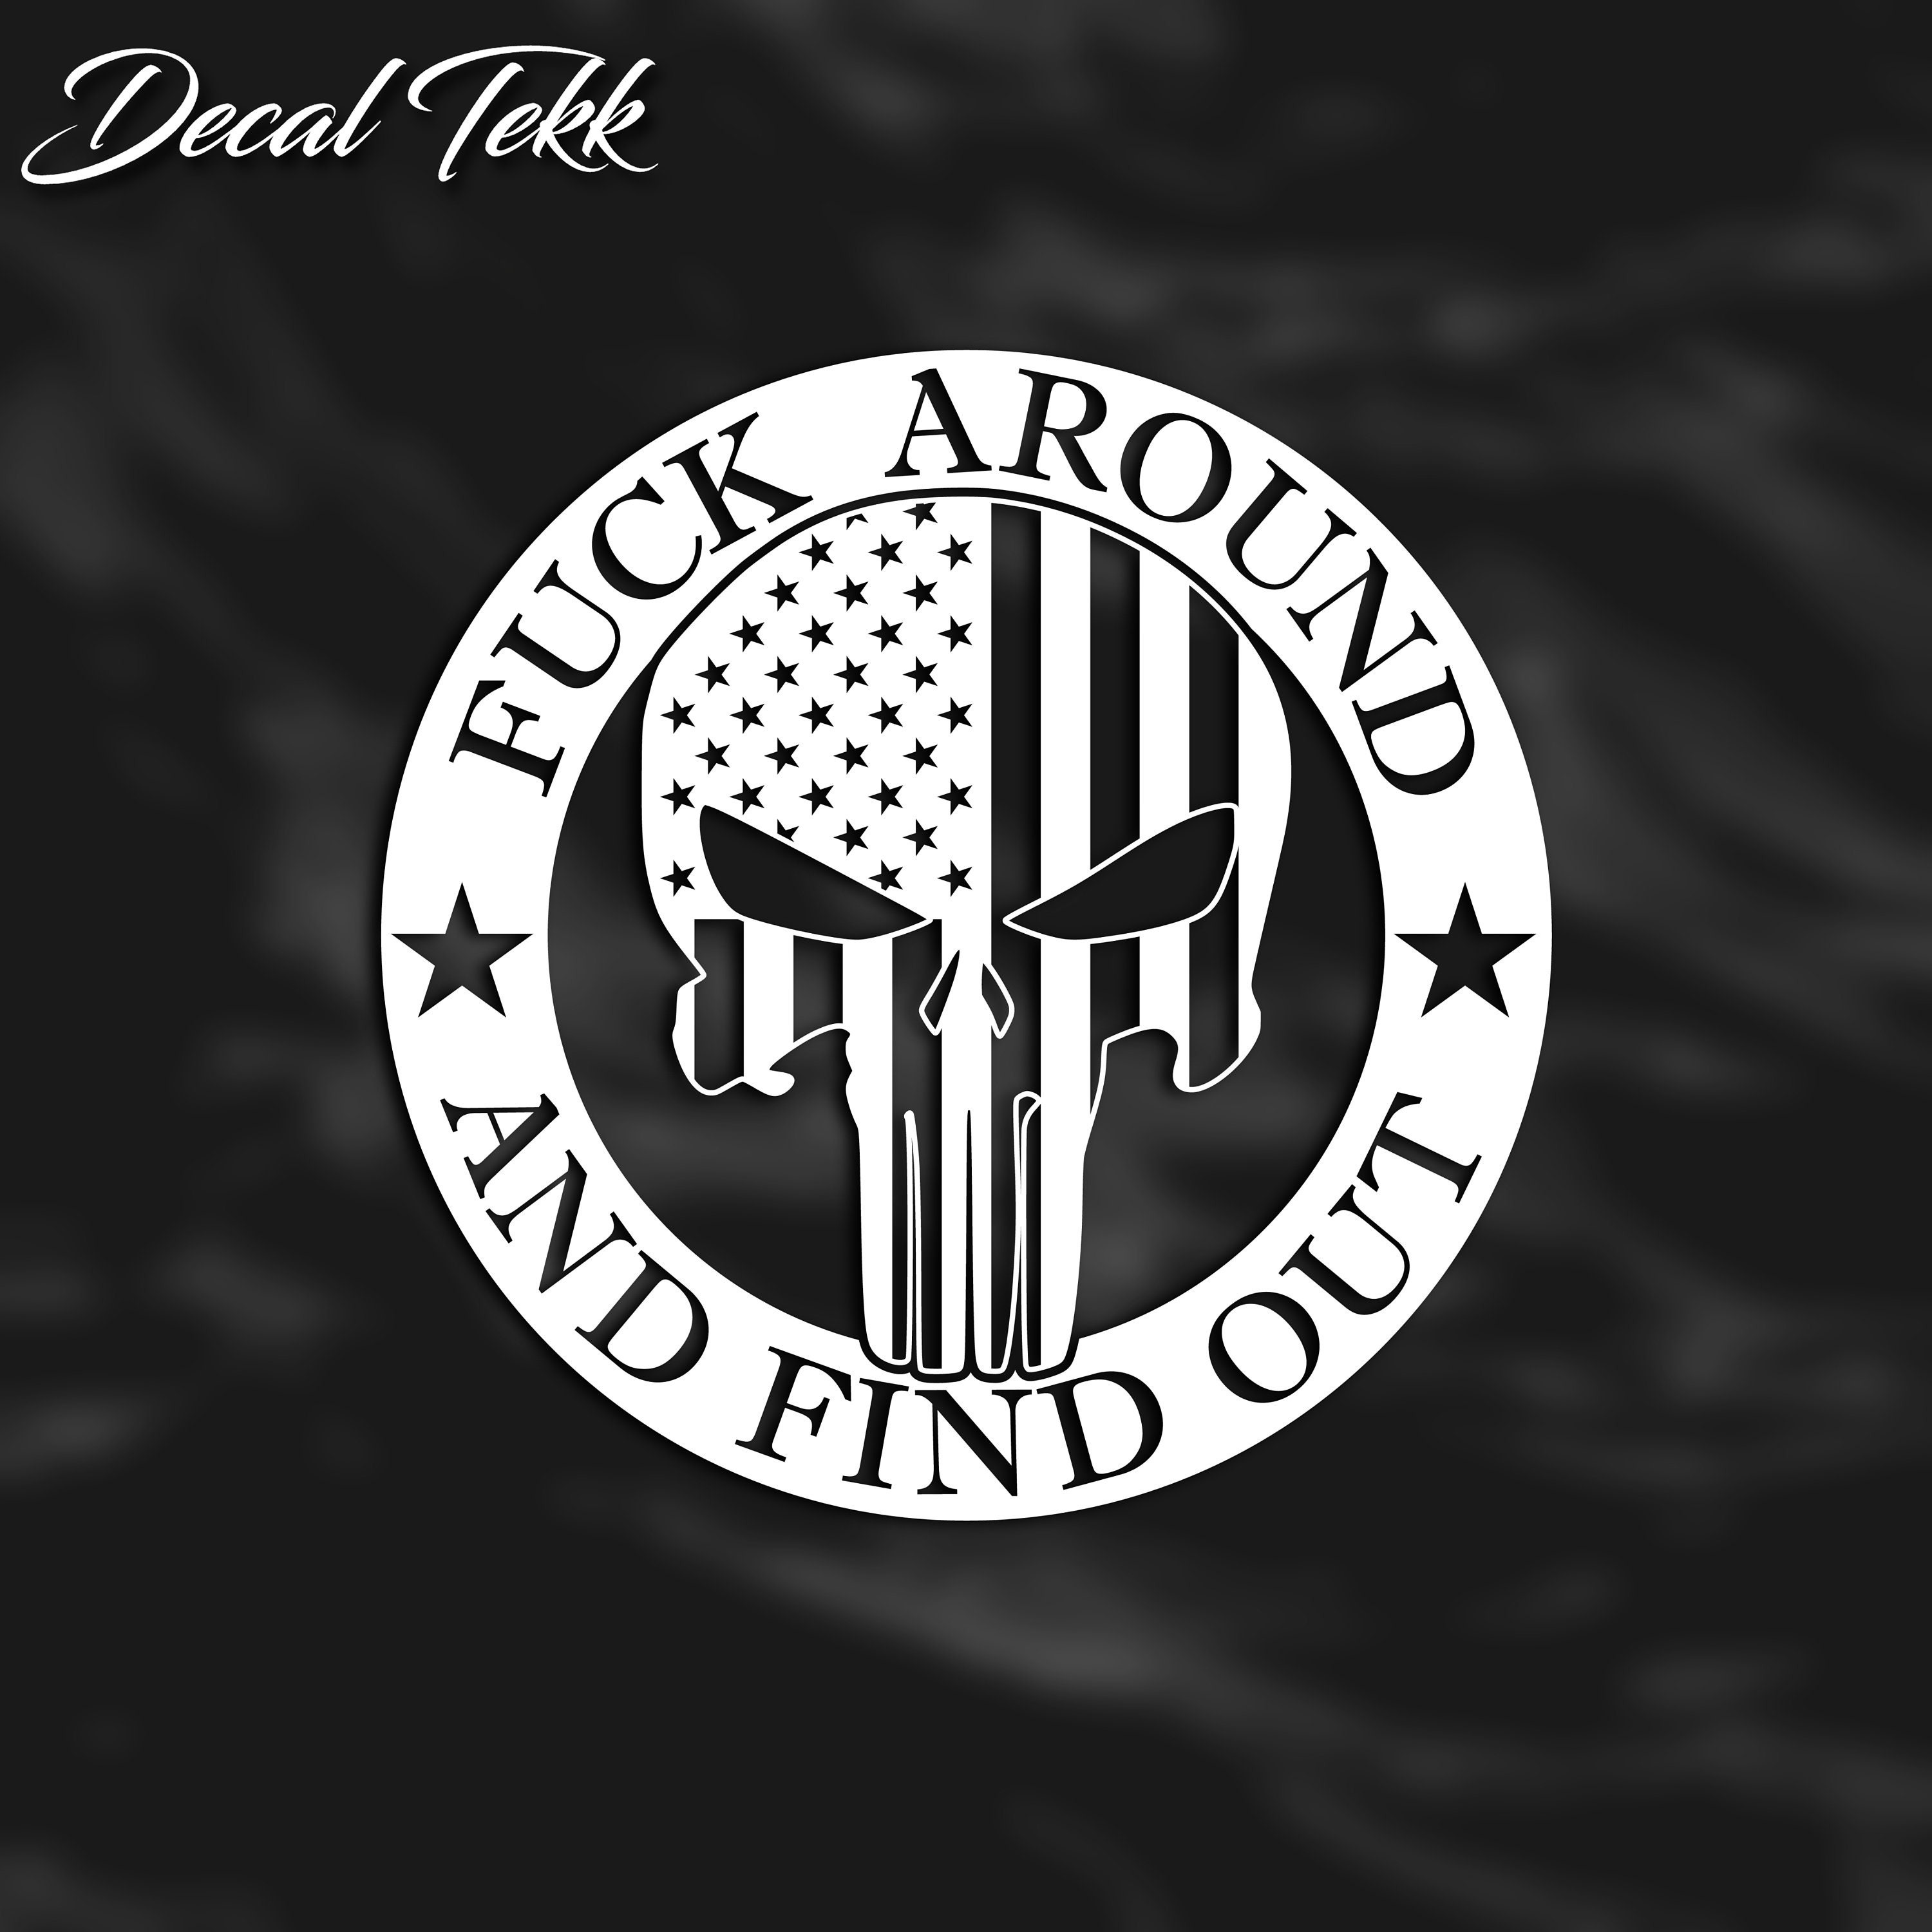 Fuck Around And Find Out decal B – North 49 Decals